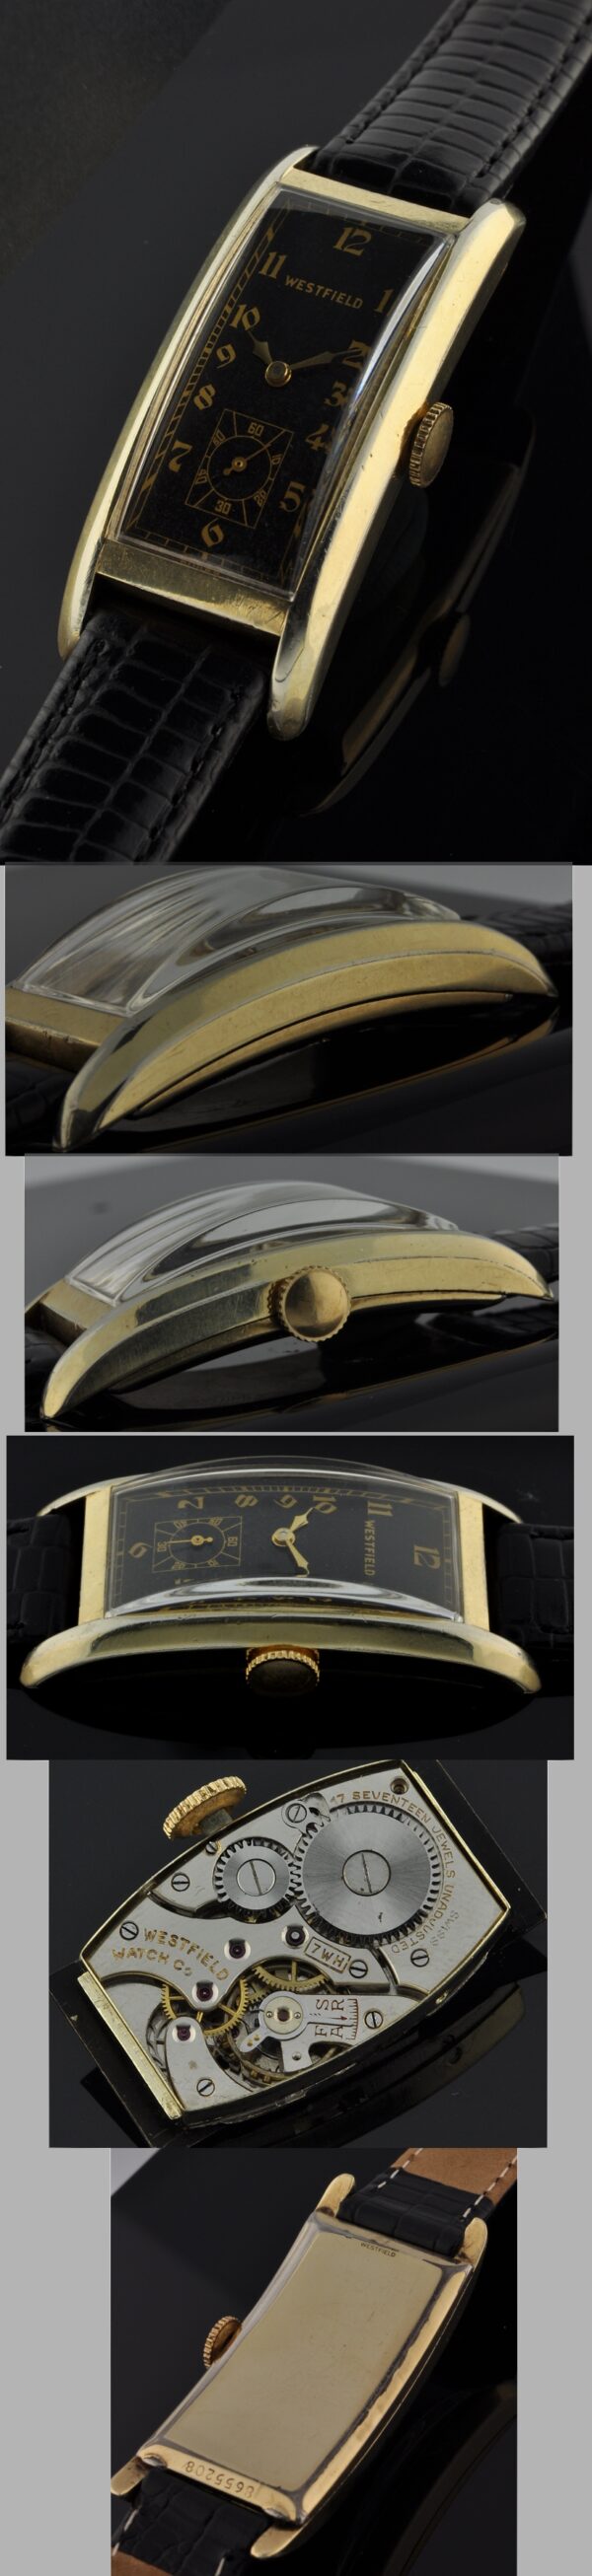 1930s Westfield elongated gold-filled watch with original signed case, deep-black dial, leather band, and manual winding Bulova movement.